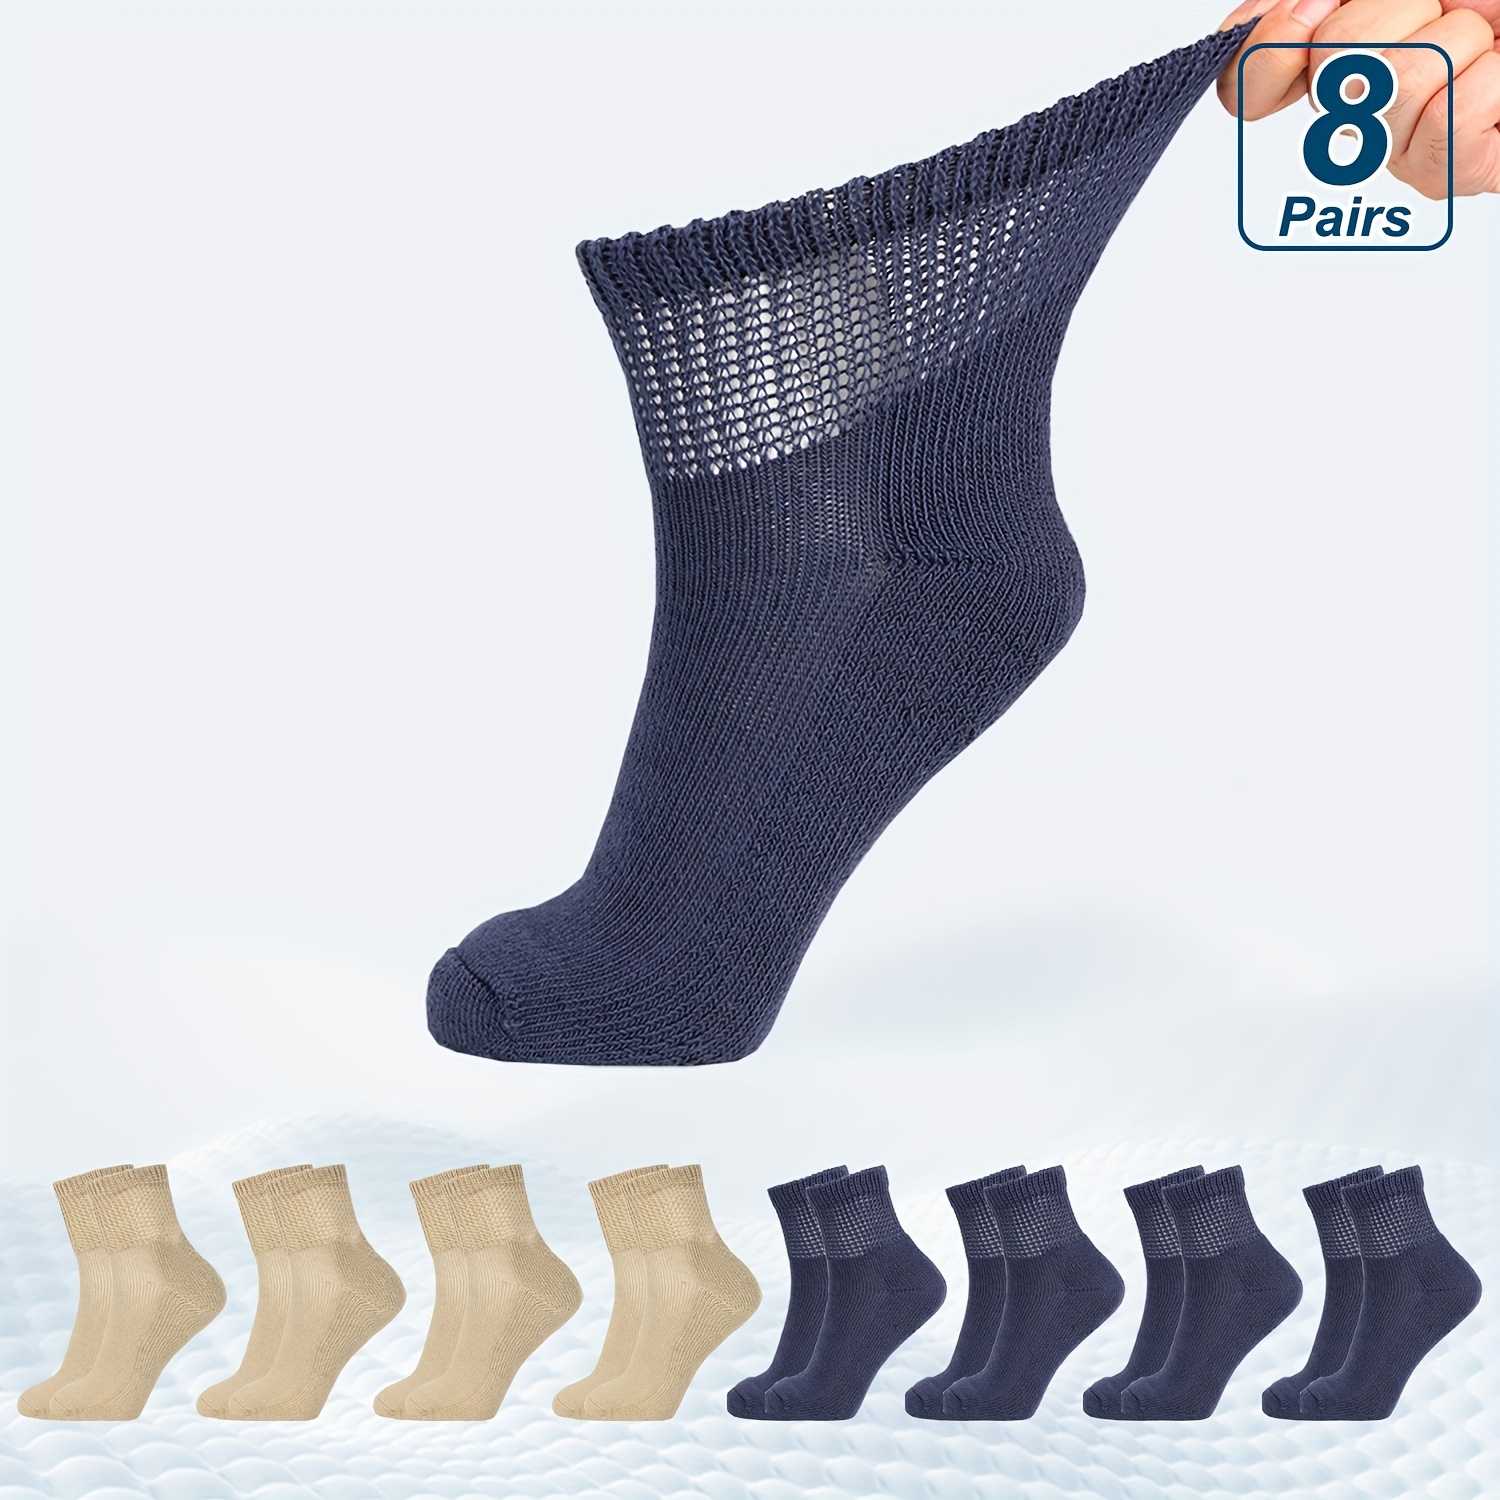 

8pairs Solid Color Breathable & Comfort Diabetic Ankle Socks Non Binding Wide Socks Men's Stocking & Hosiery